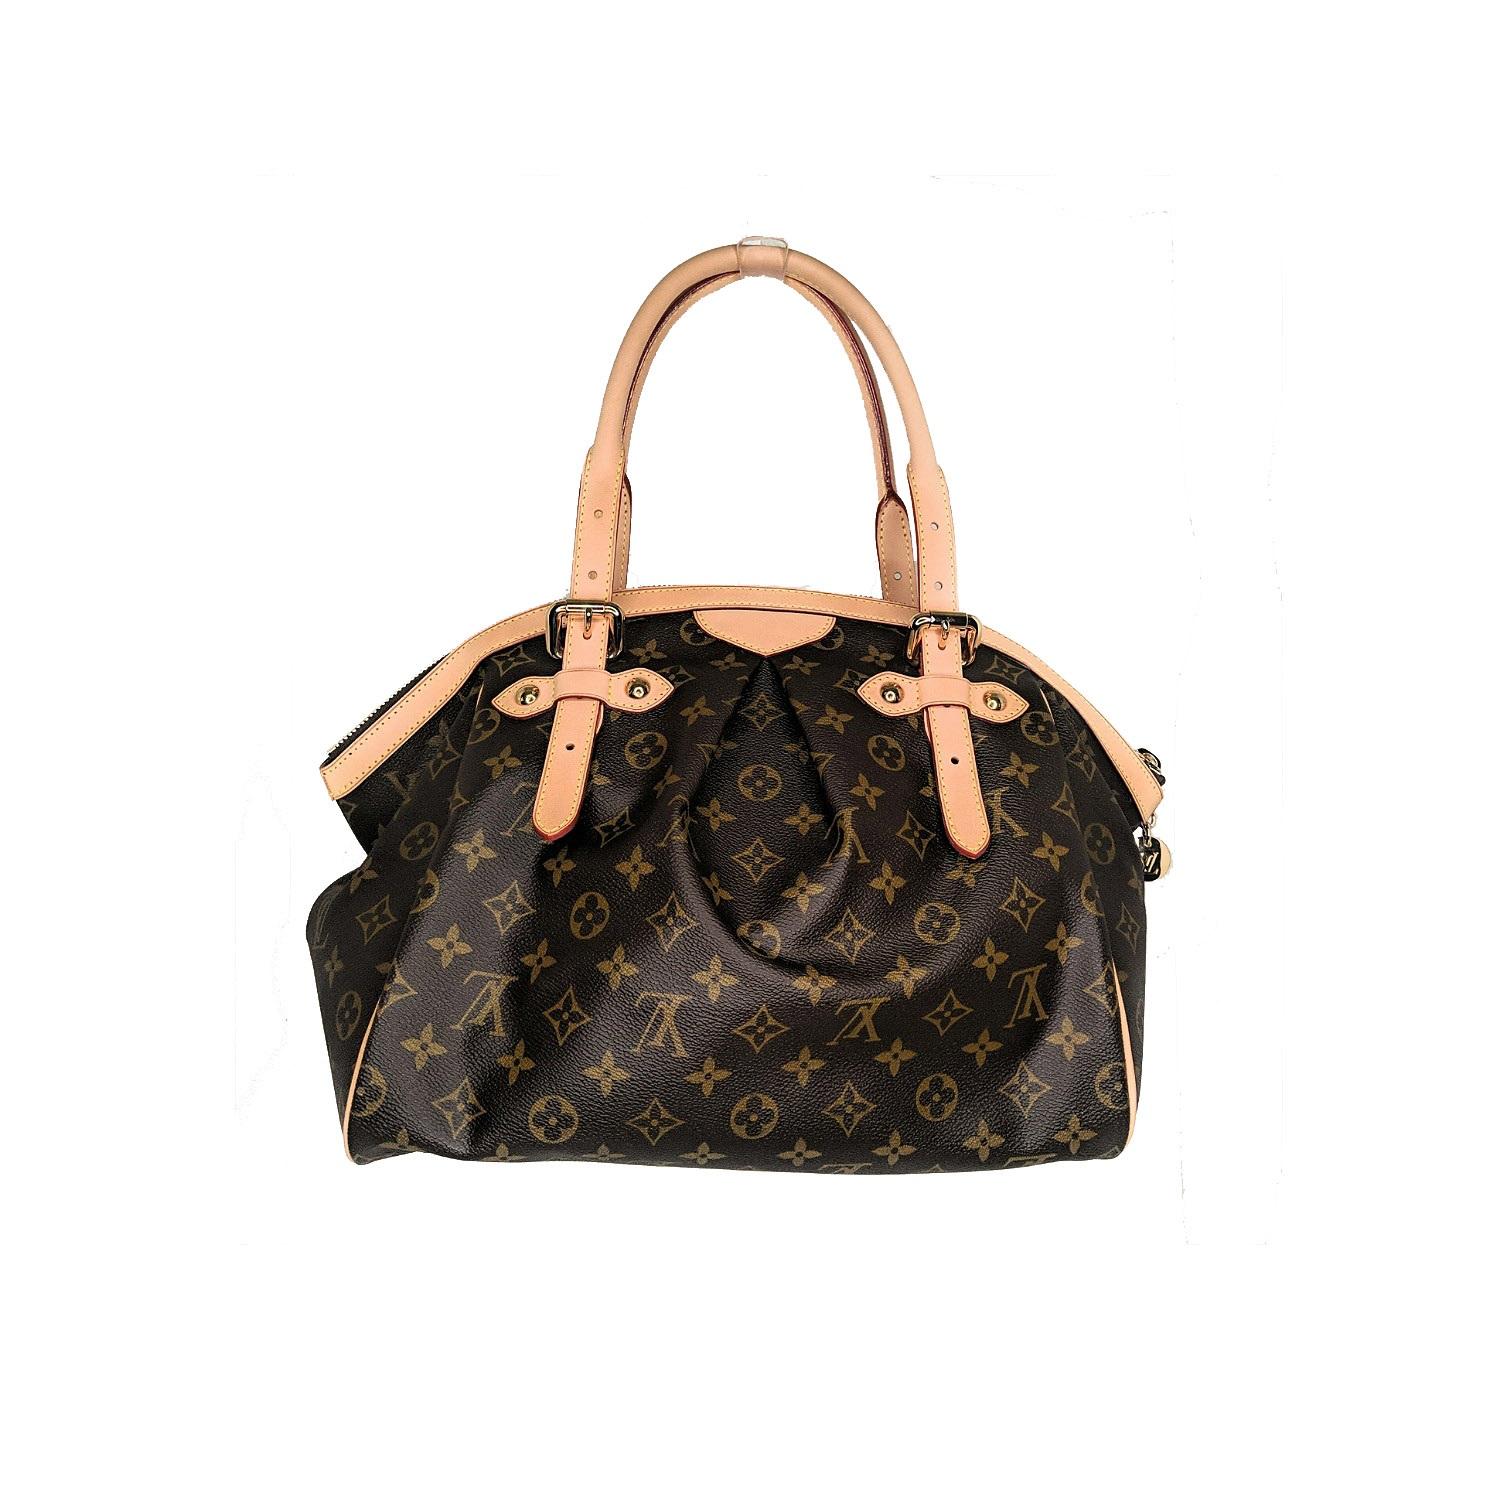 This unique Louis Vuitton Monogram Canvas Tivoli GM Bag is the one for you. The Tivoli, whose name was inspired by the famous city of Tivoli, Italy, features stylish details such as an inverted pleating, a frame top and a gold-tone zipper LV pull.